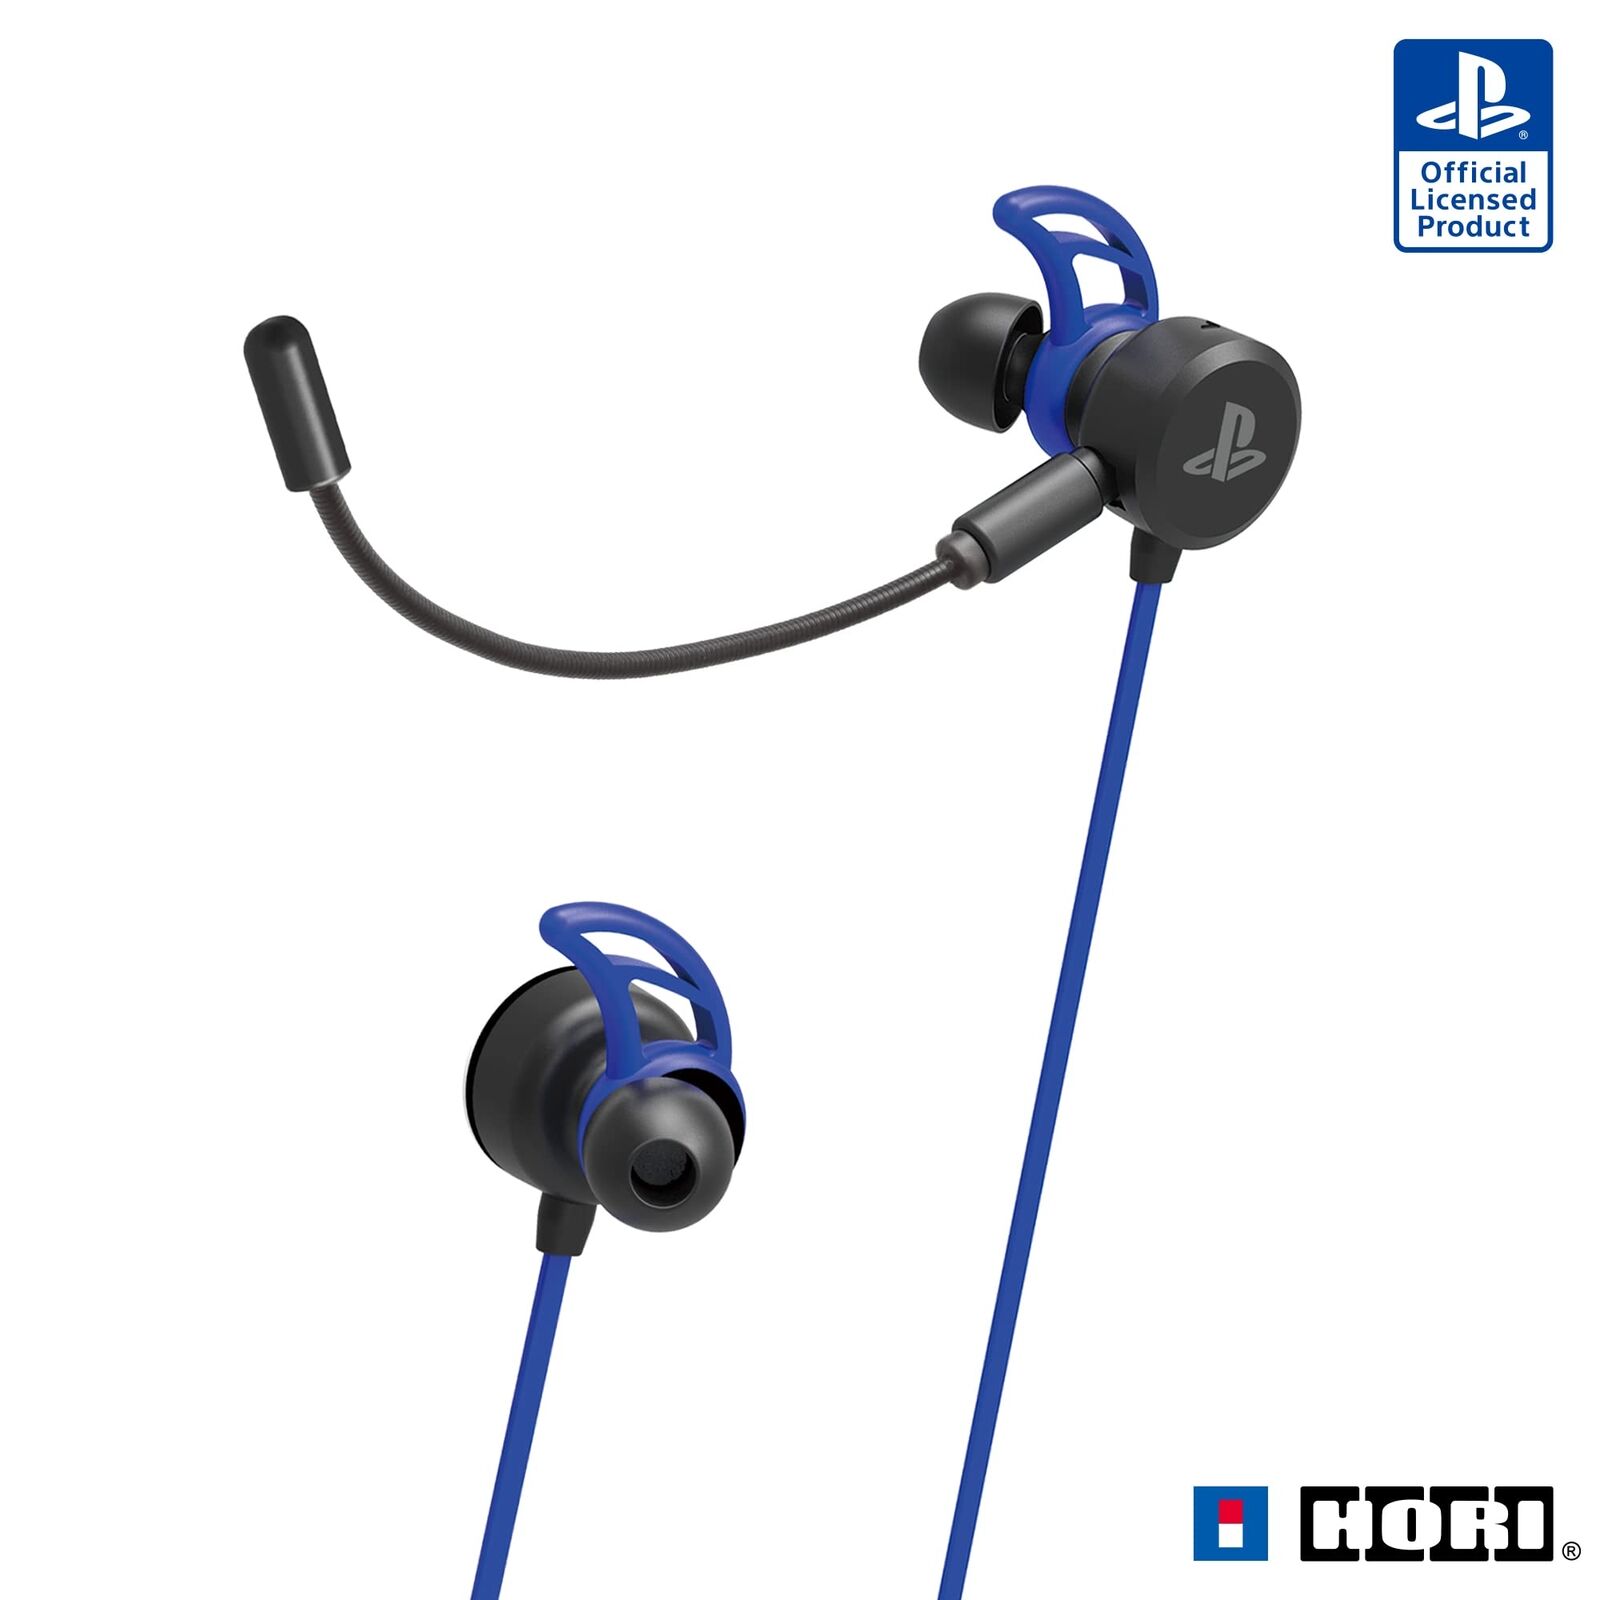 Hori Ps5 Operation Confirmed Wired Horigaming Headset Sony PS4-156 Blue Black